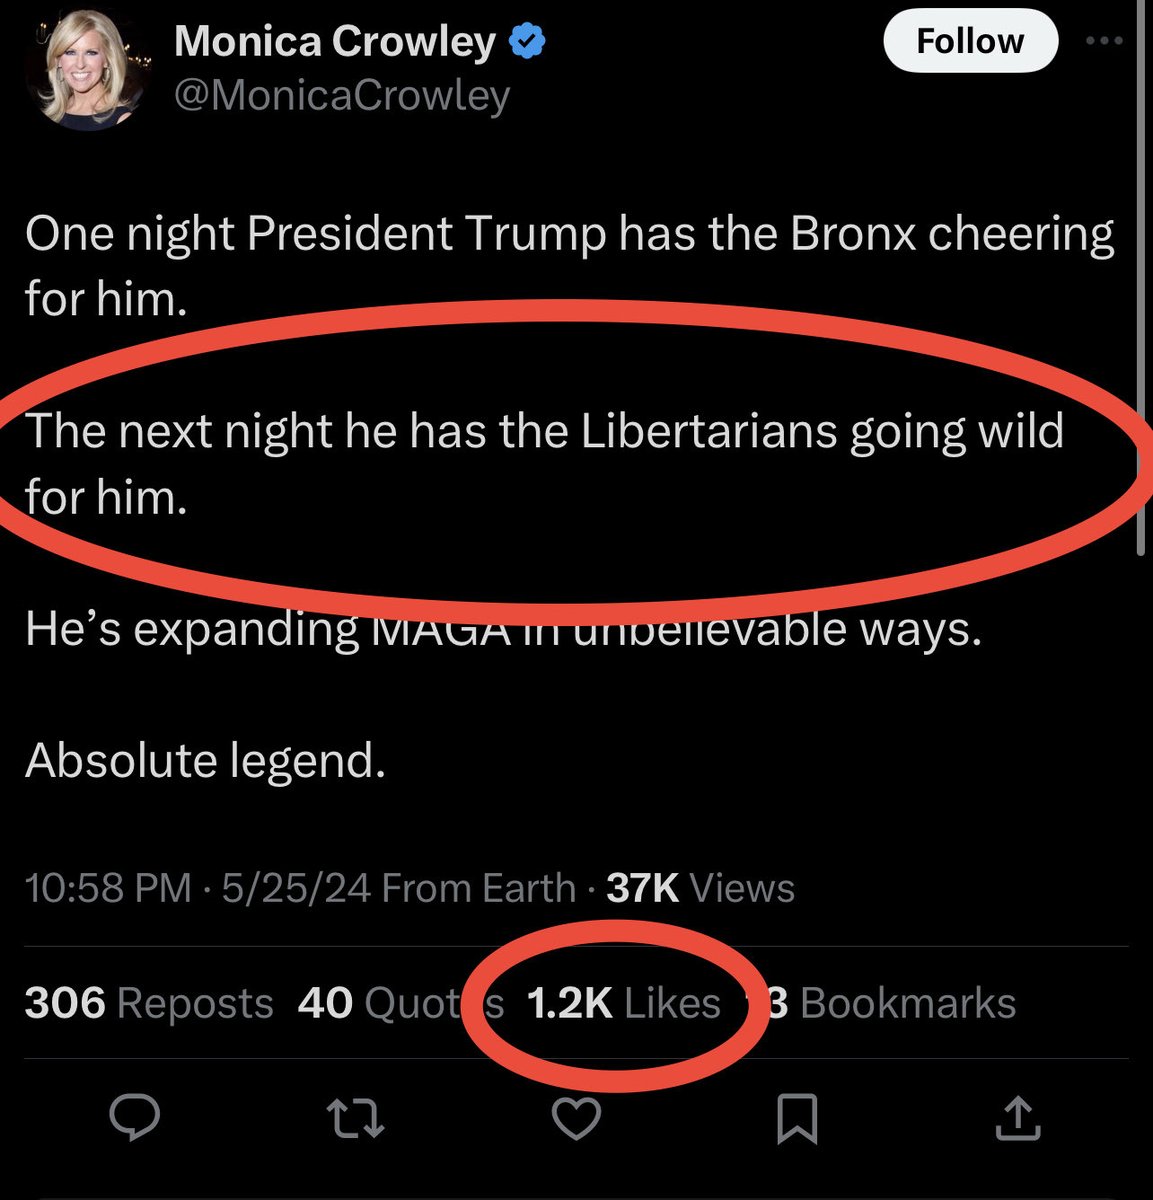 There is zero connection to reality with this post from Monica Crowley. But lots of engagement.